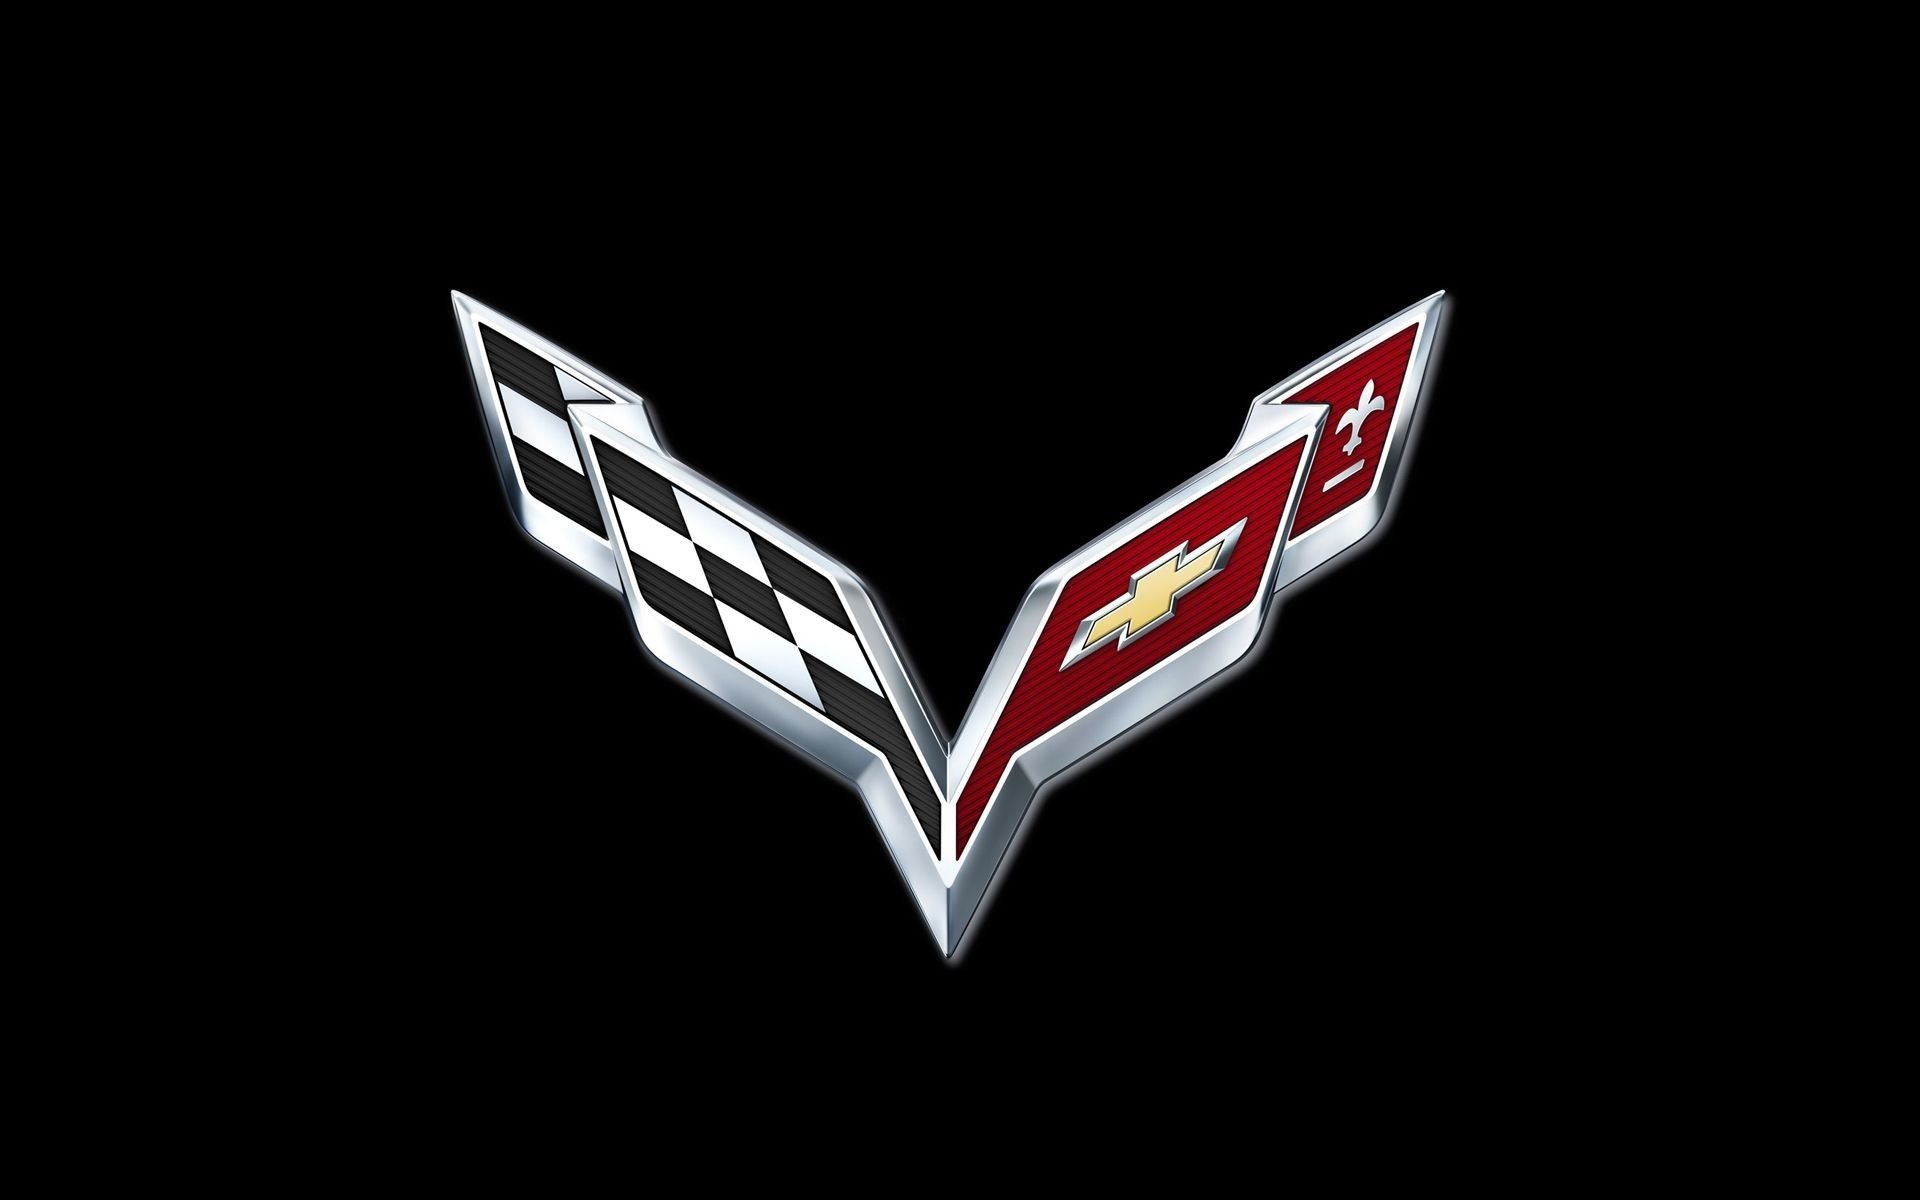 Cool Chevy Logos Wallpapers Wallpapers.